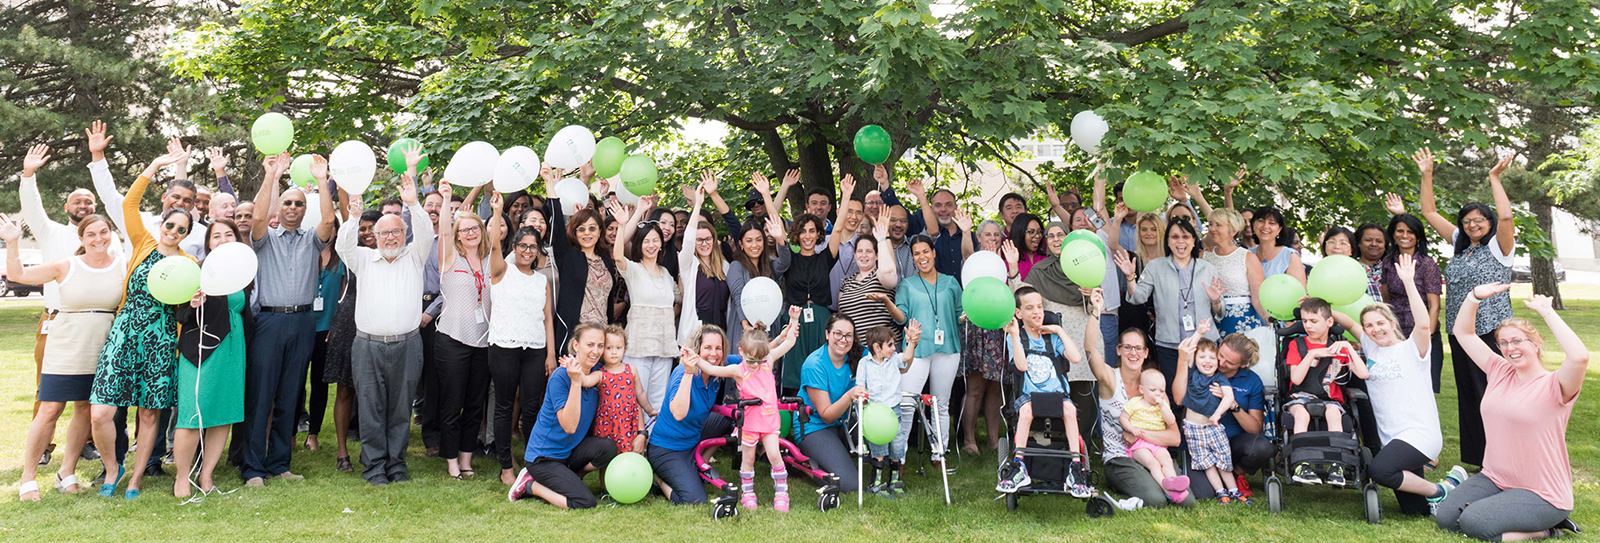 MODC Staff and clients group photo with balloons